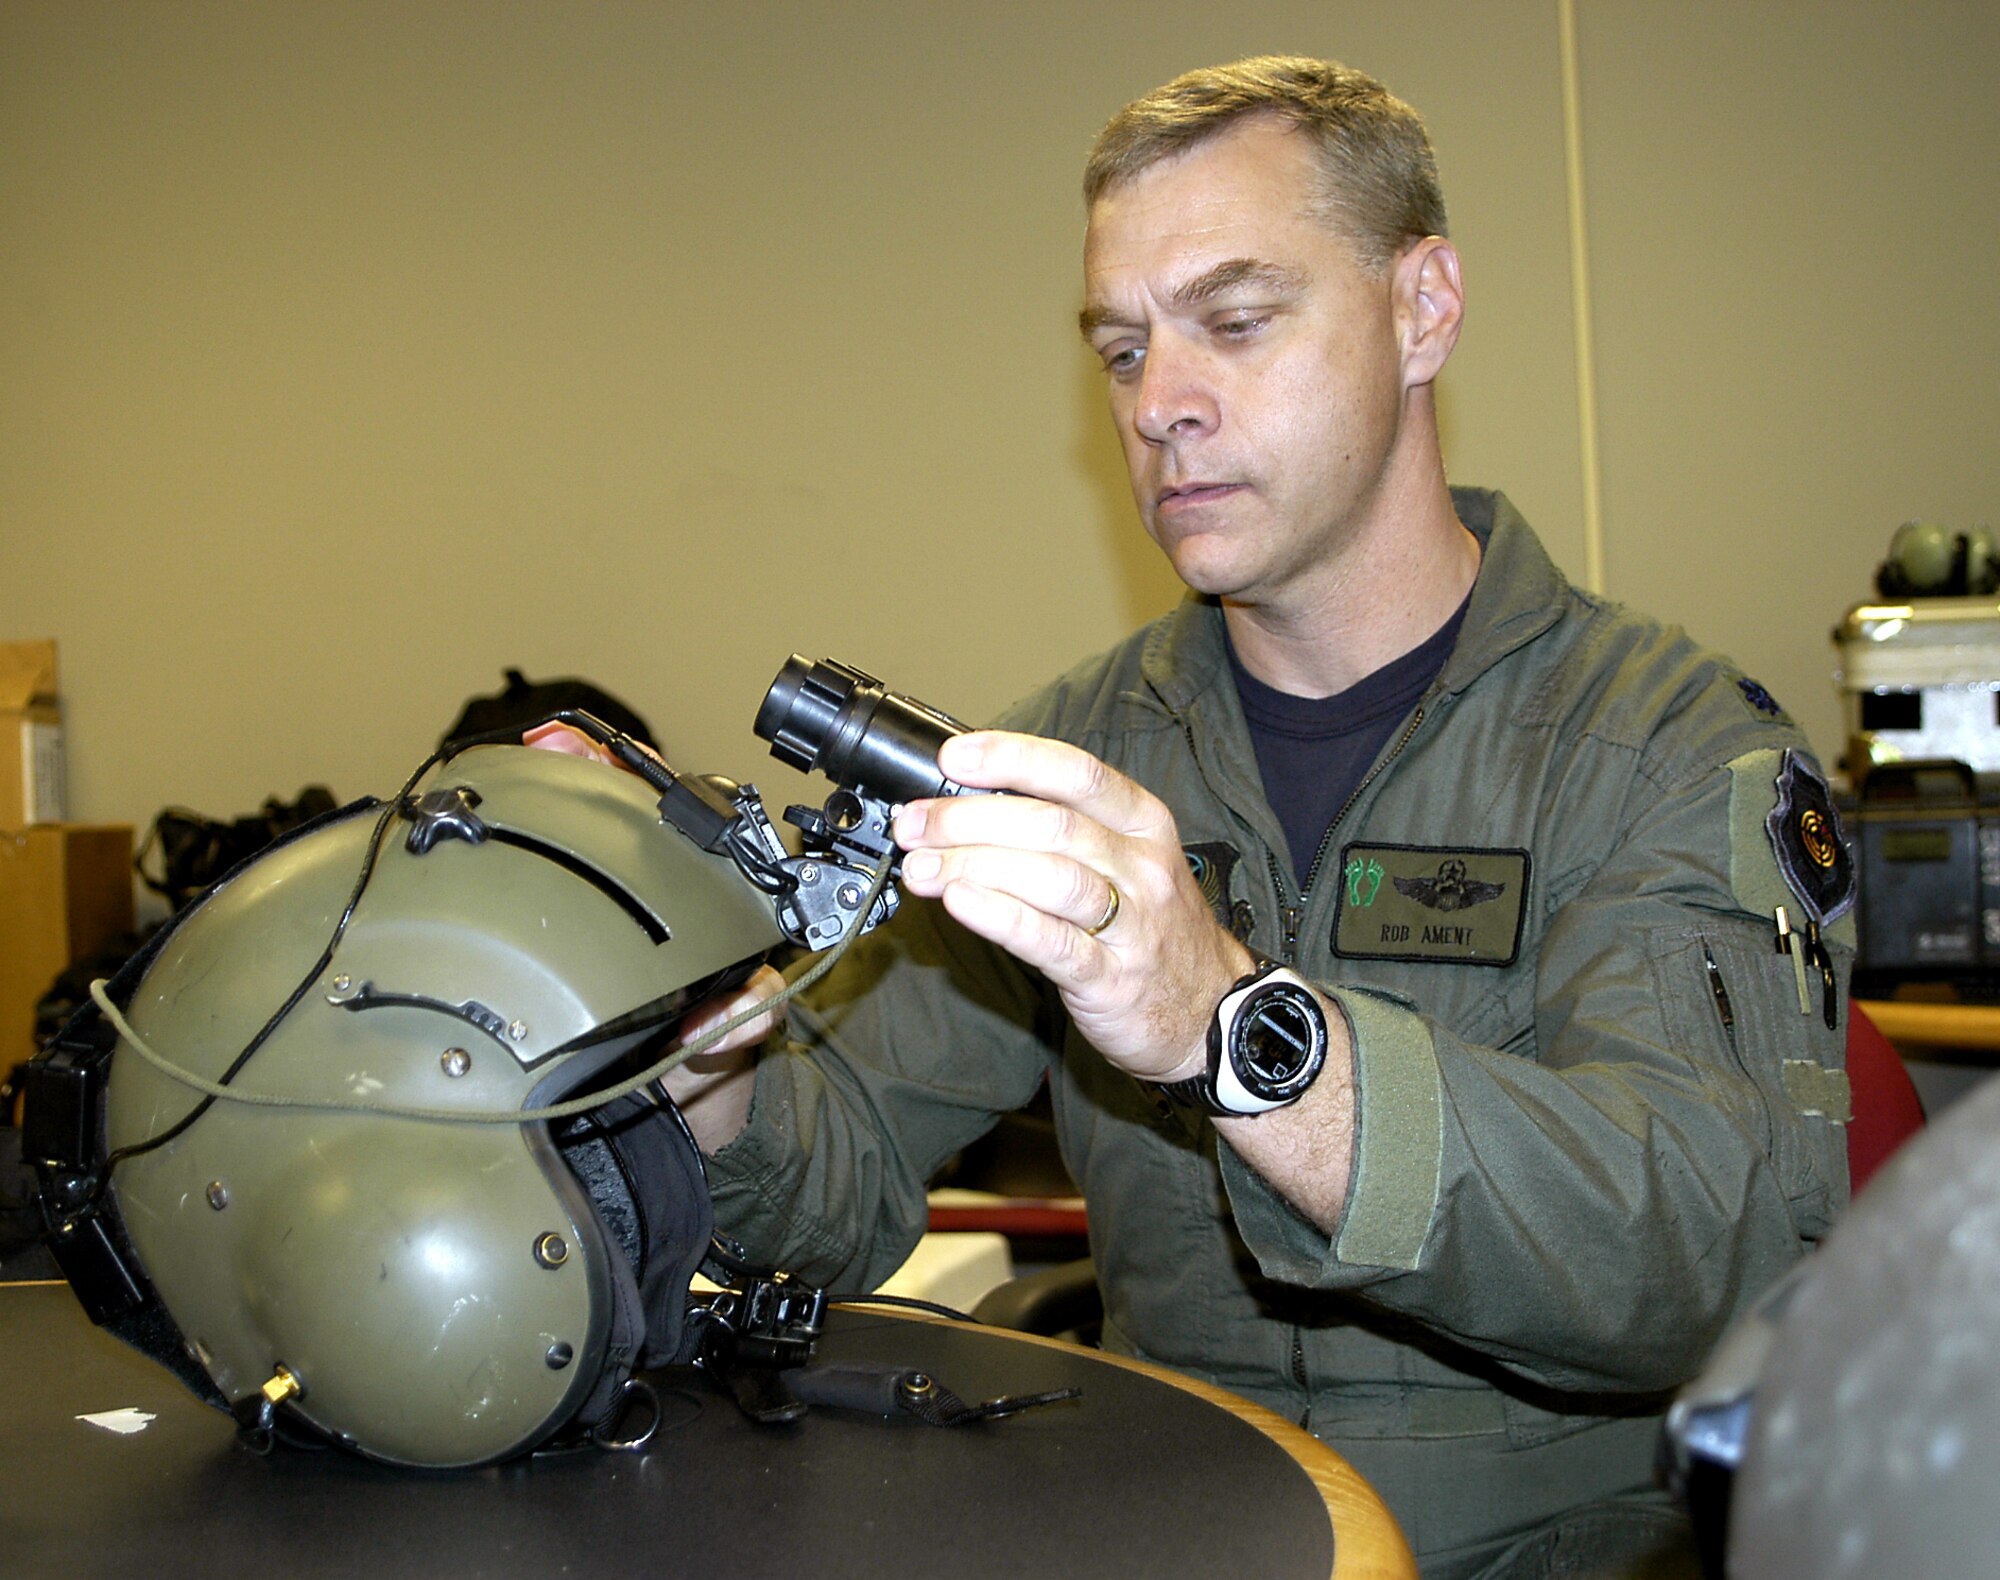 JACKSON, Miss. -- Lt. Col. Rob Ament inspects his night-vision device before a rescue flight.  The devices include night-vision goggles, a helmet mounting system and a battery pack.  Rescuers on HH-60G Pave Hawk helicopters used the equipment to locate people in New Orleans stranded by Hurricane Katrina.  Colonel Ament is the director of operations for Air Force Reserve Command's 920th Rescue Wing at Patrick Air Force Base, Fla.  (U.S. Air Force photo by Senior Master Sgt. Elaine Mayo)